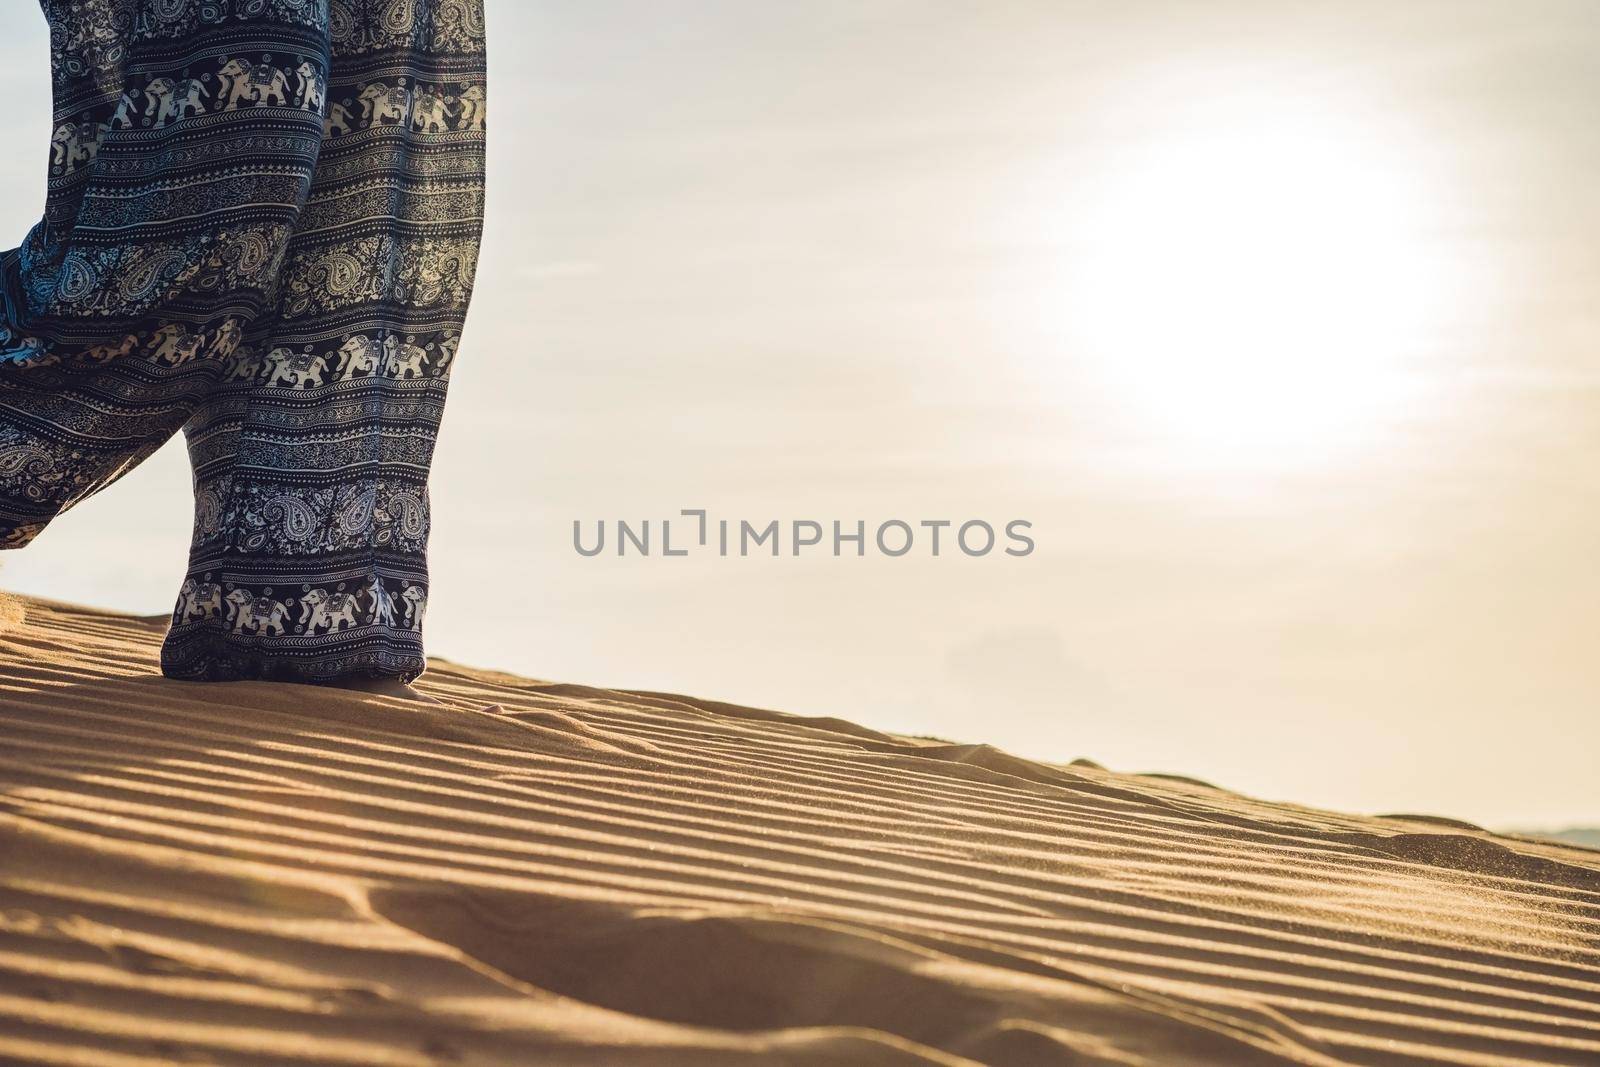 young woman in rad sandy desert at sunset or dawn